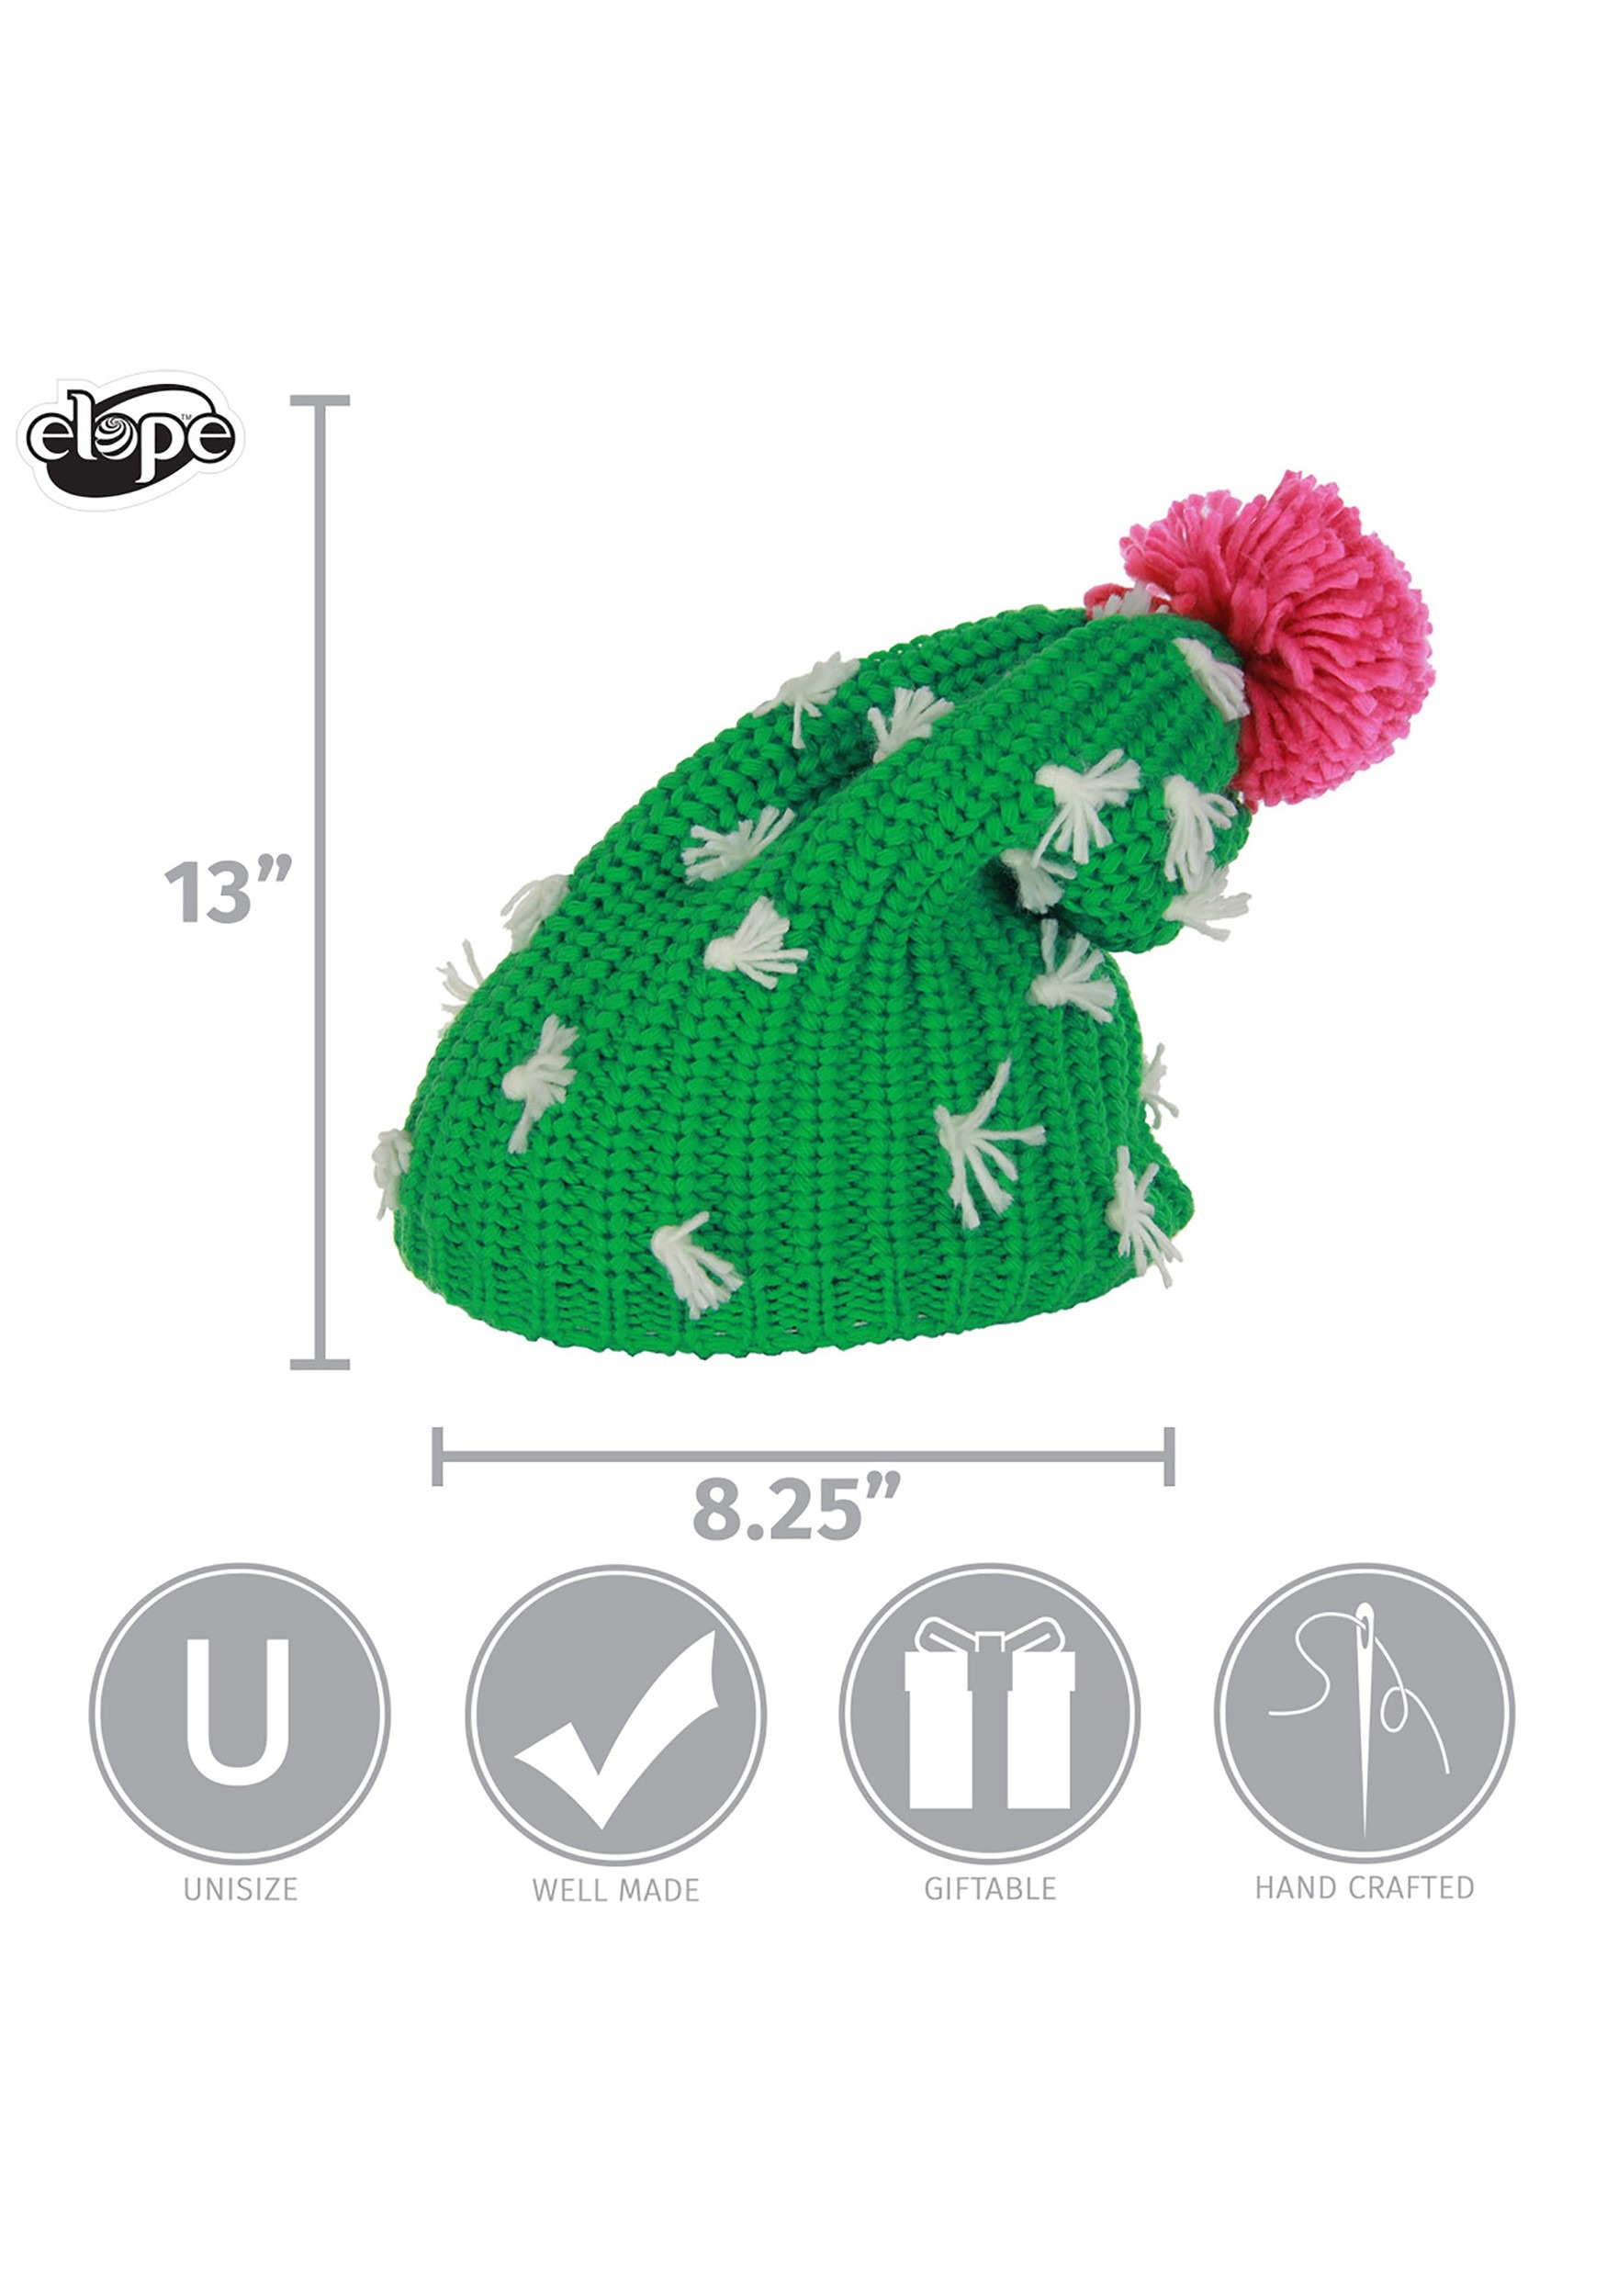 Cactus Knit Slouch Beanie